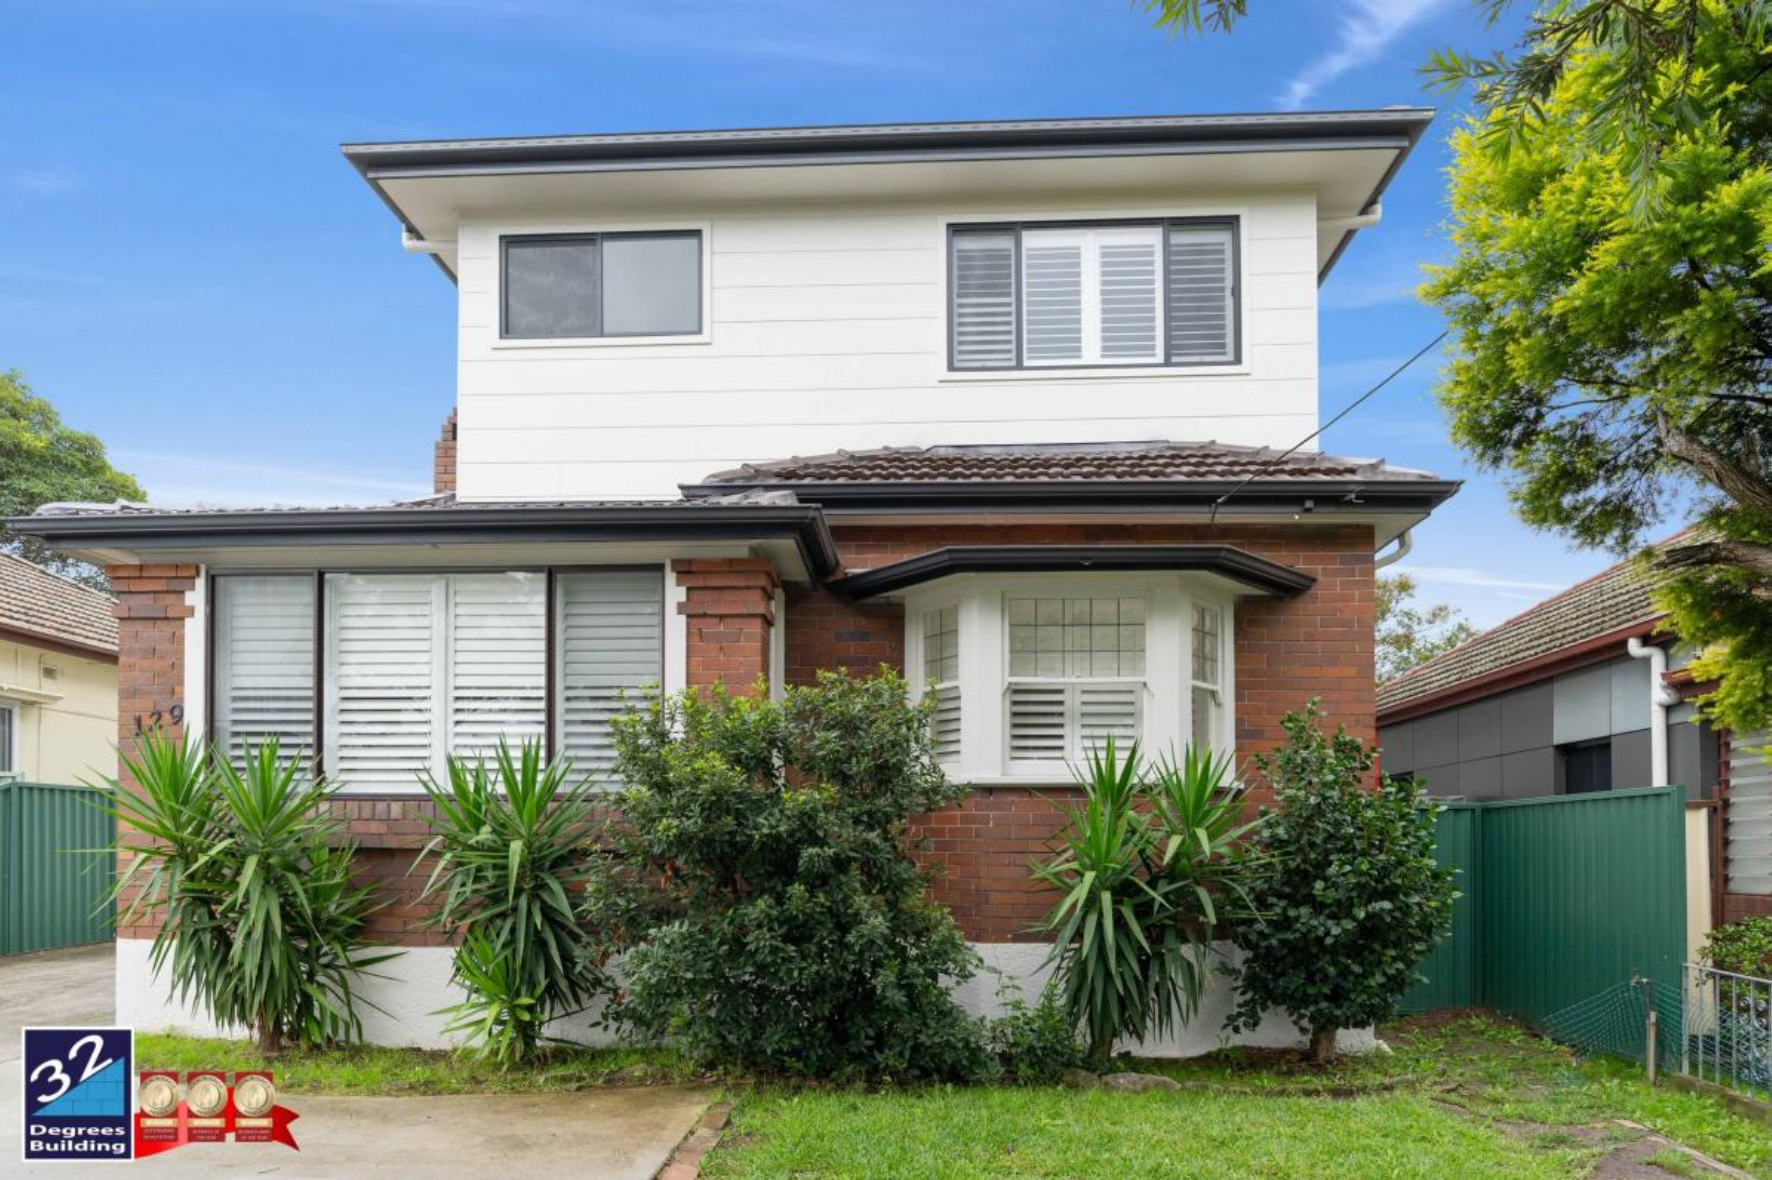 First floor addition to a home located in Lakemba